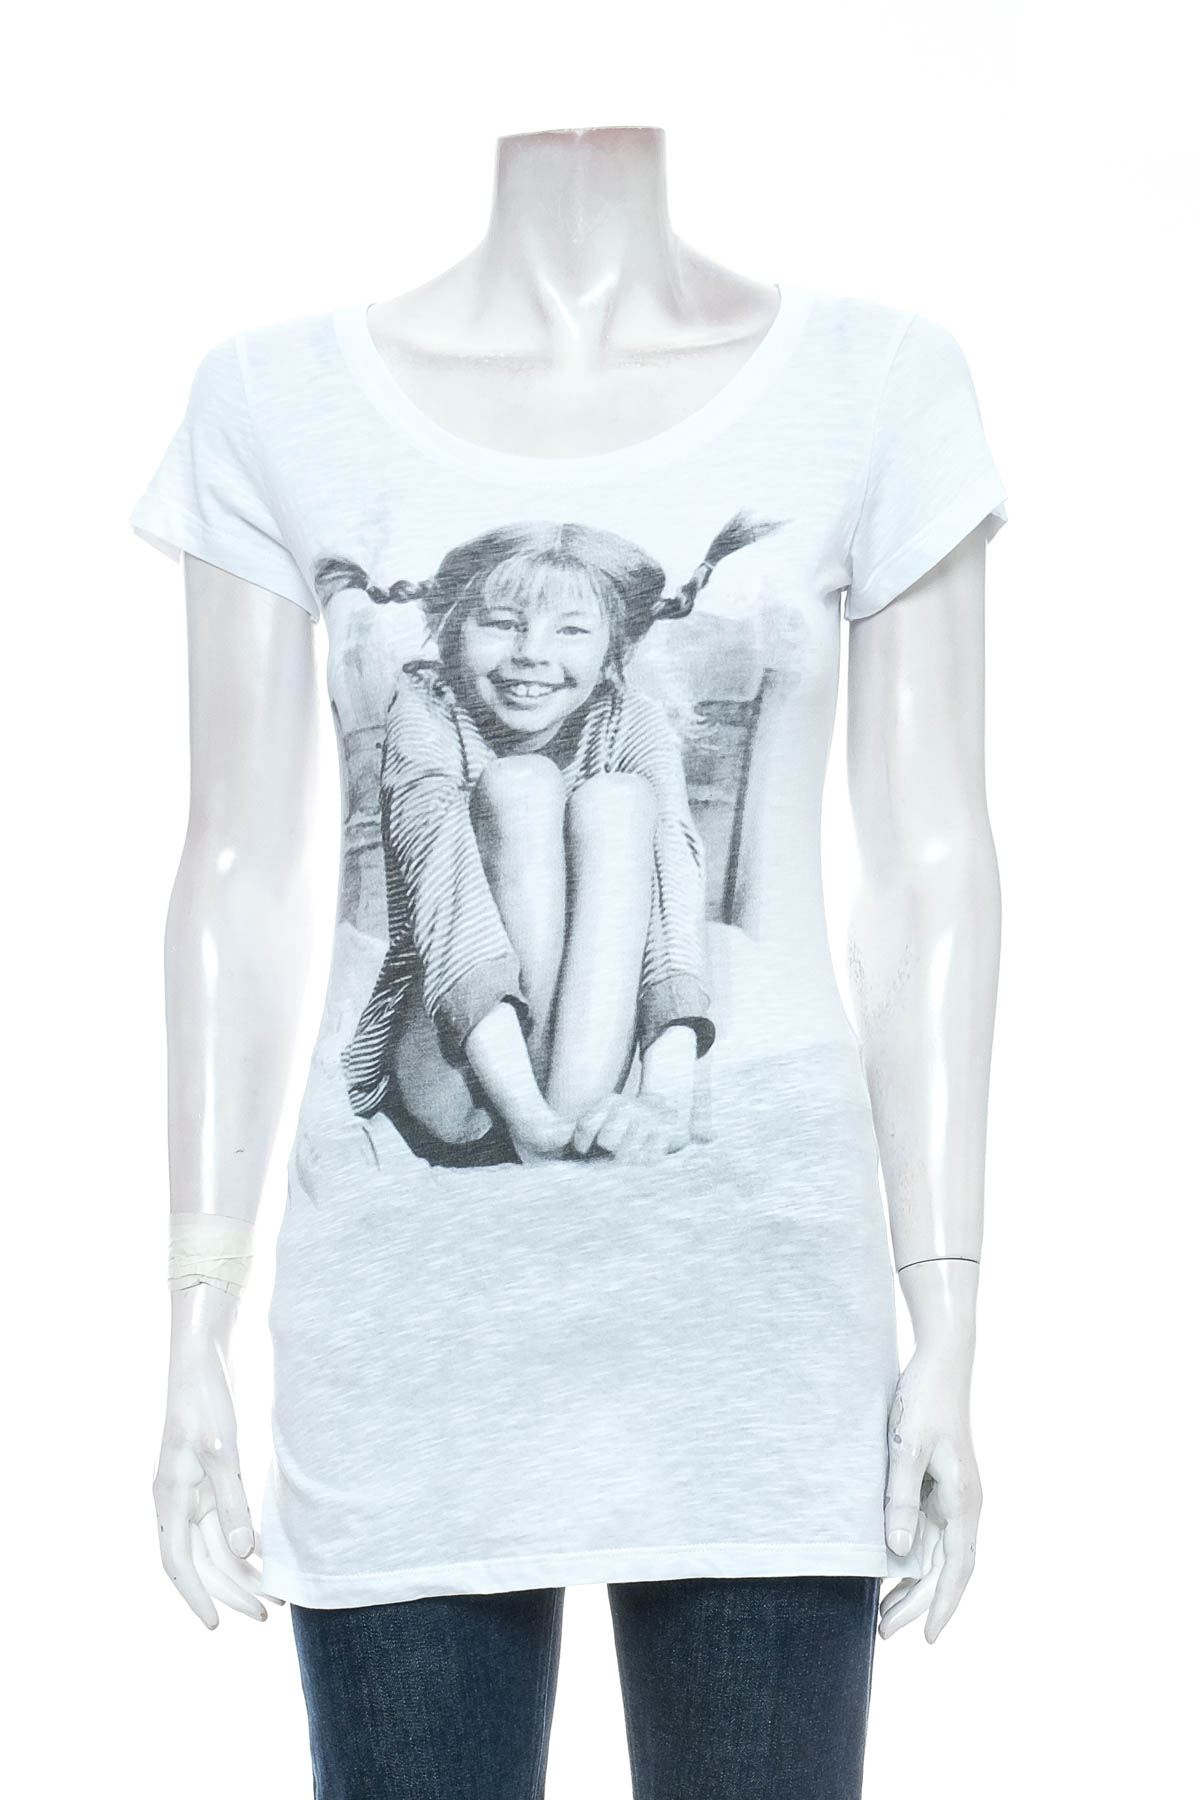 Women's t-shirt - Made in Italy - 0